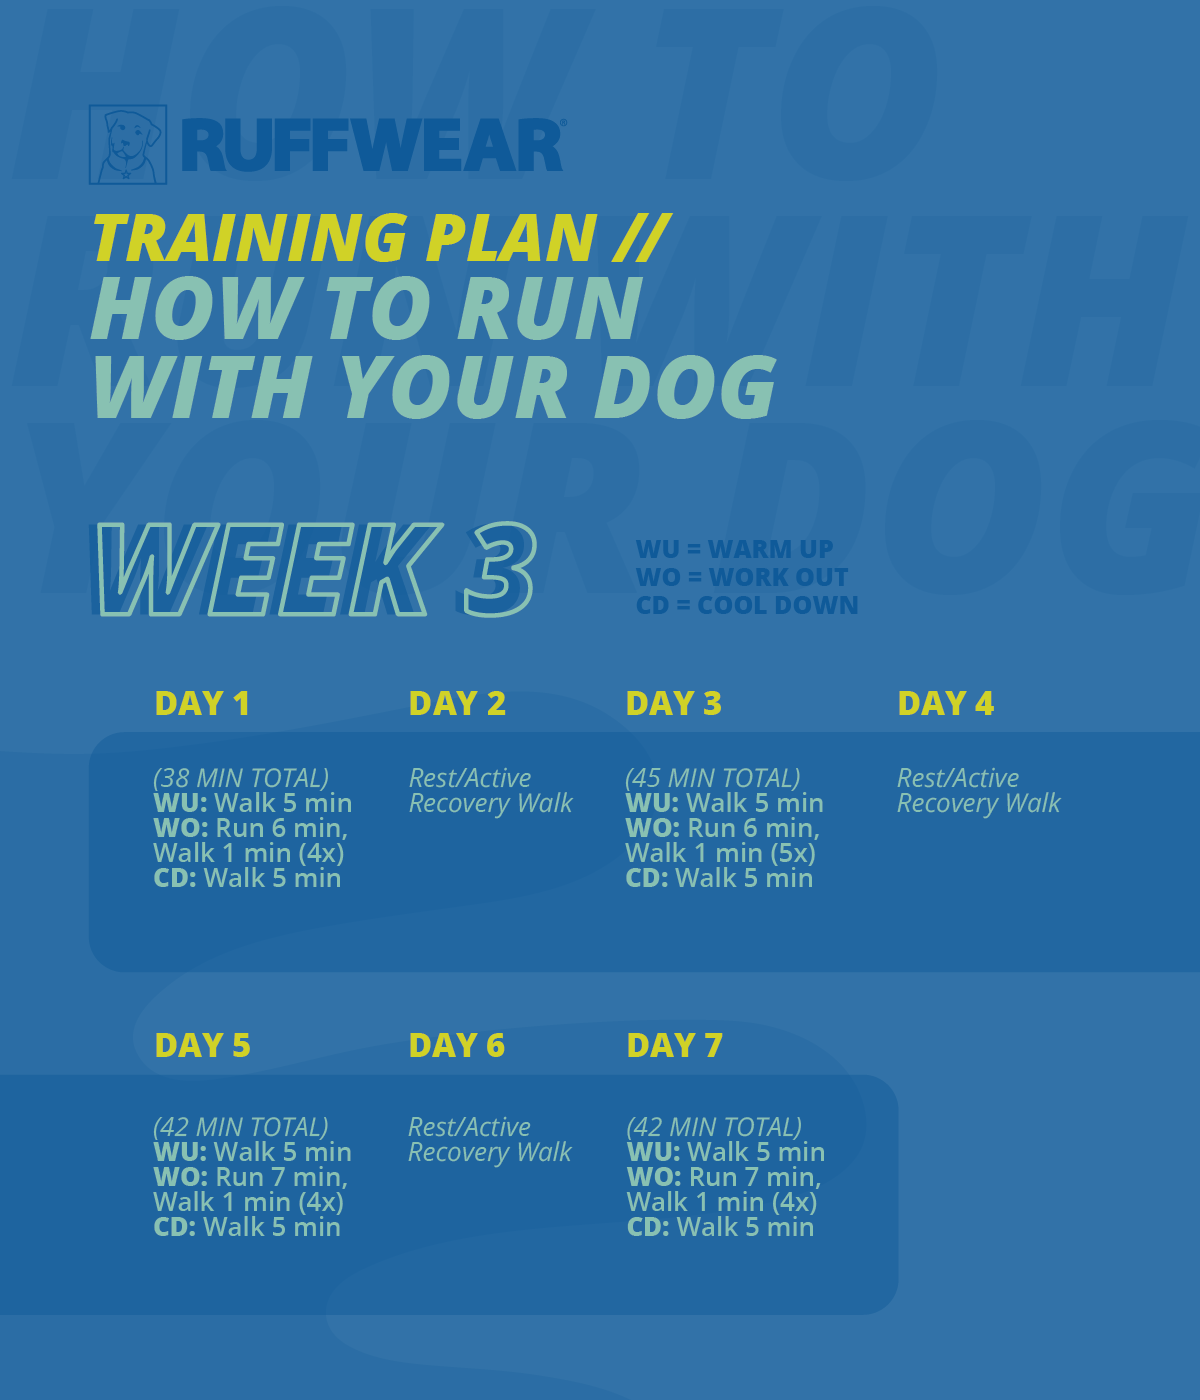 4-Week 5K Training Plan for Running with Your Dog